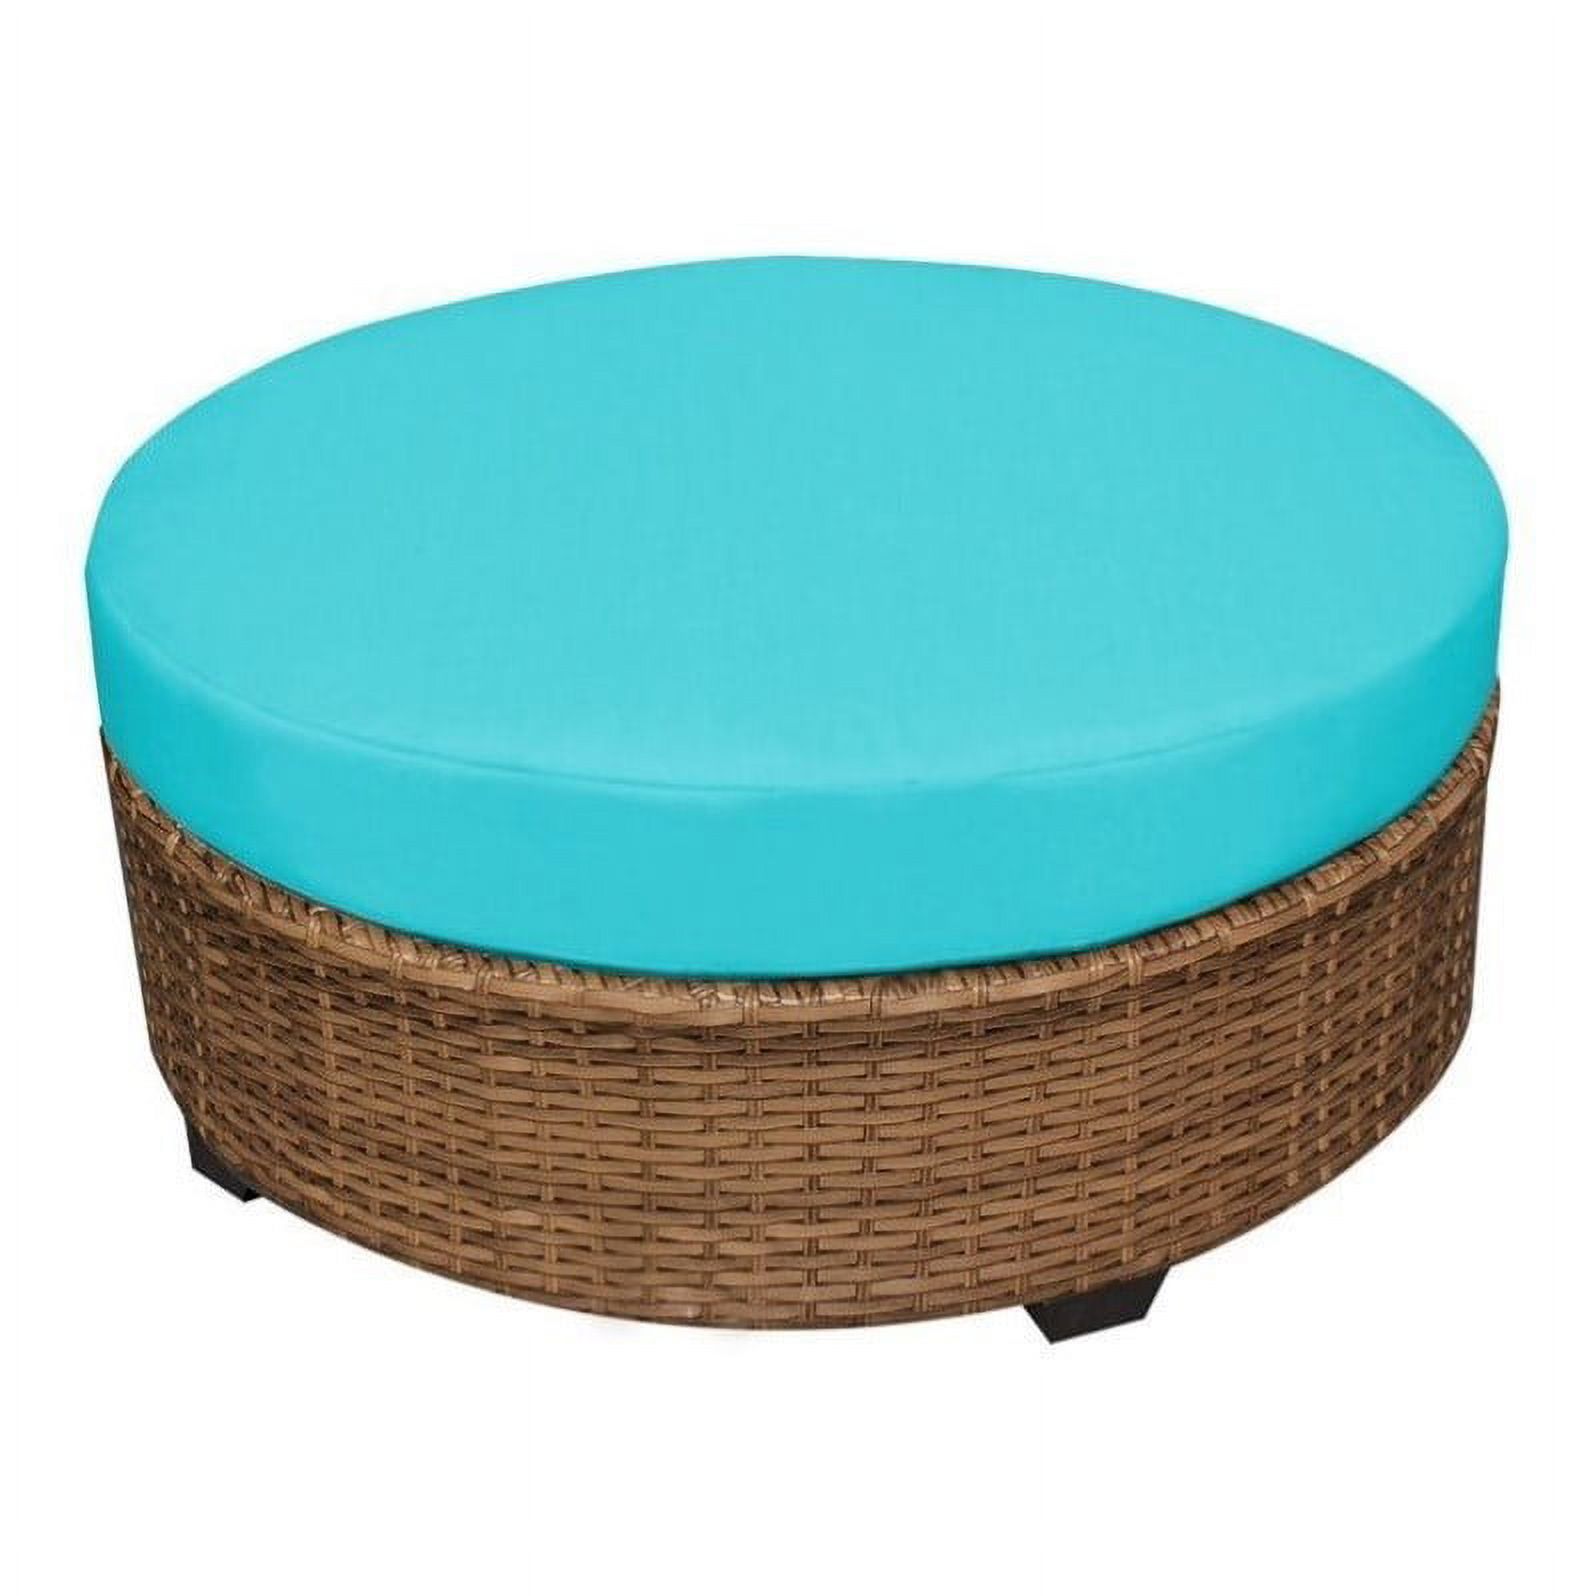 Set of 2 Outdoor Wicker Curved Sofa and Coffee Table in Aruba Blue - image 3 of 5